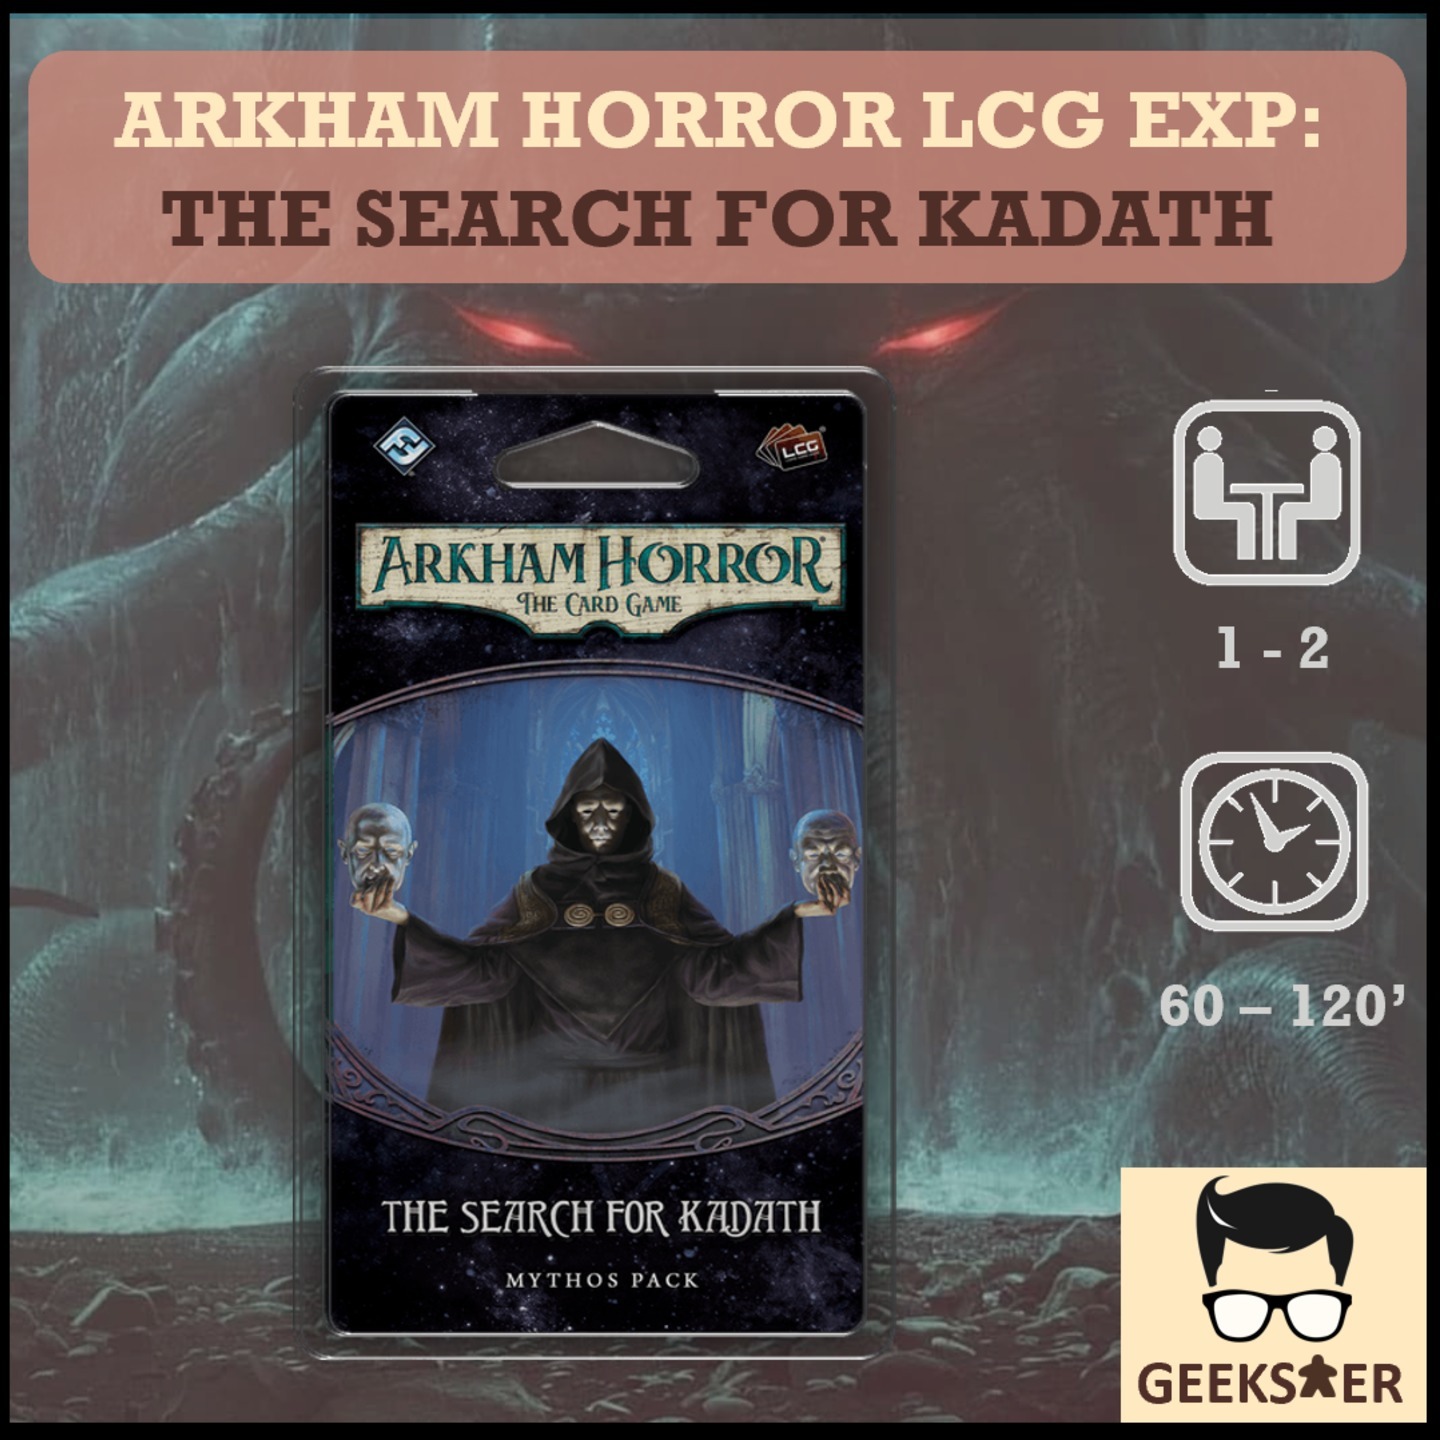 Arkham Horror LCG Exp The Search for Kadath